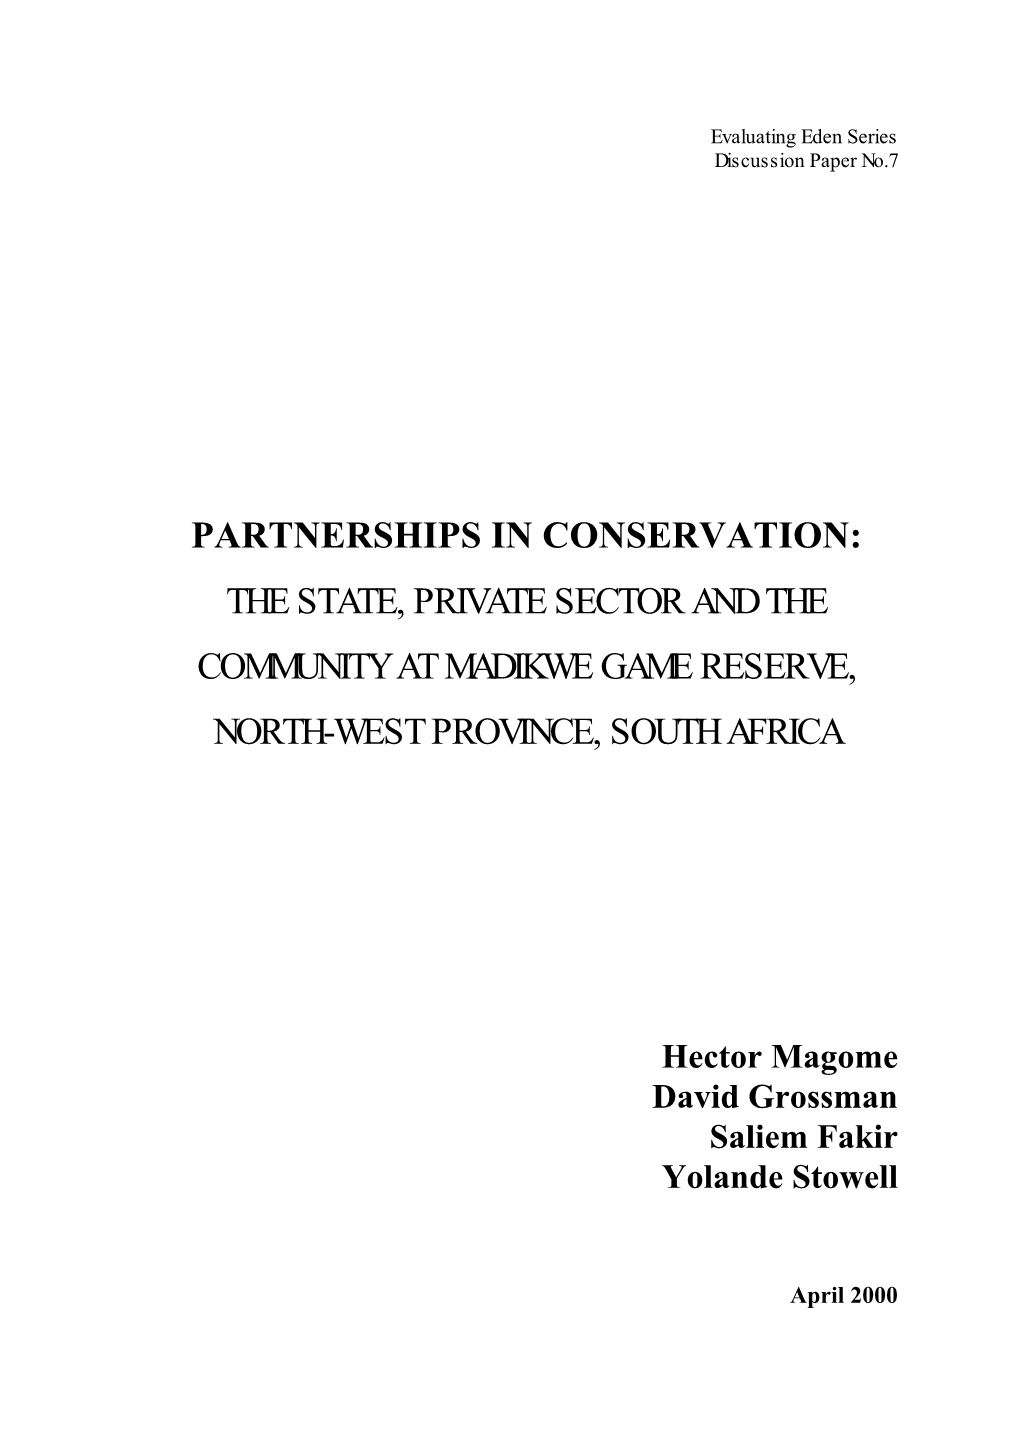 Partnerships in Conservation: the State, Private Sector and the Community at Madikwe Game Reserve, North-West Province, South Africa